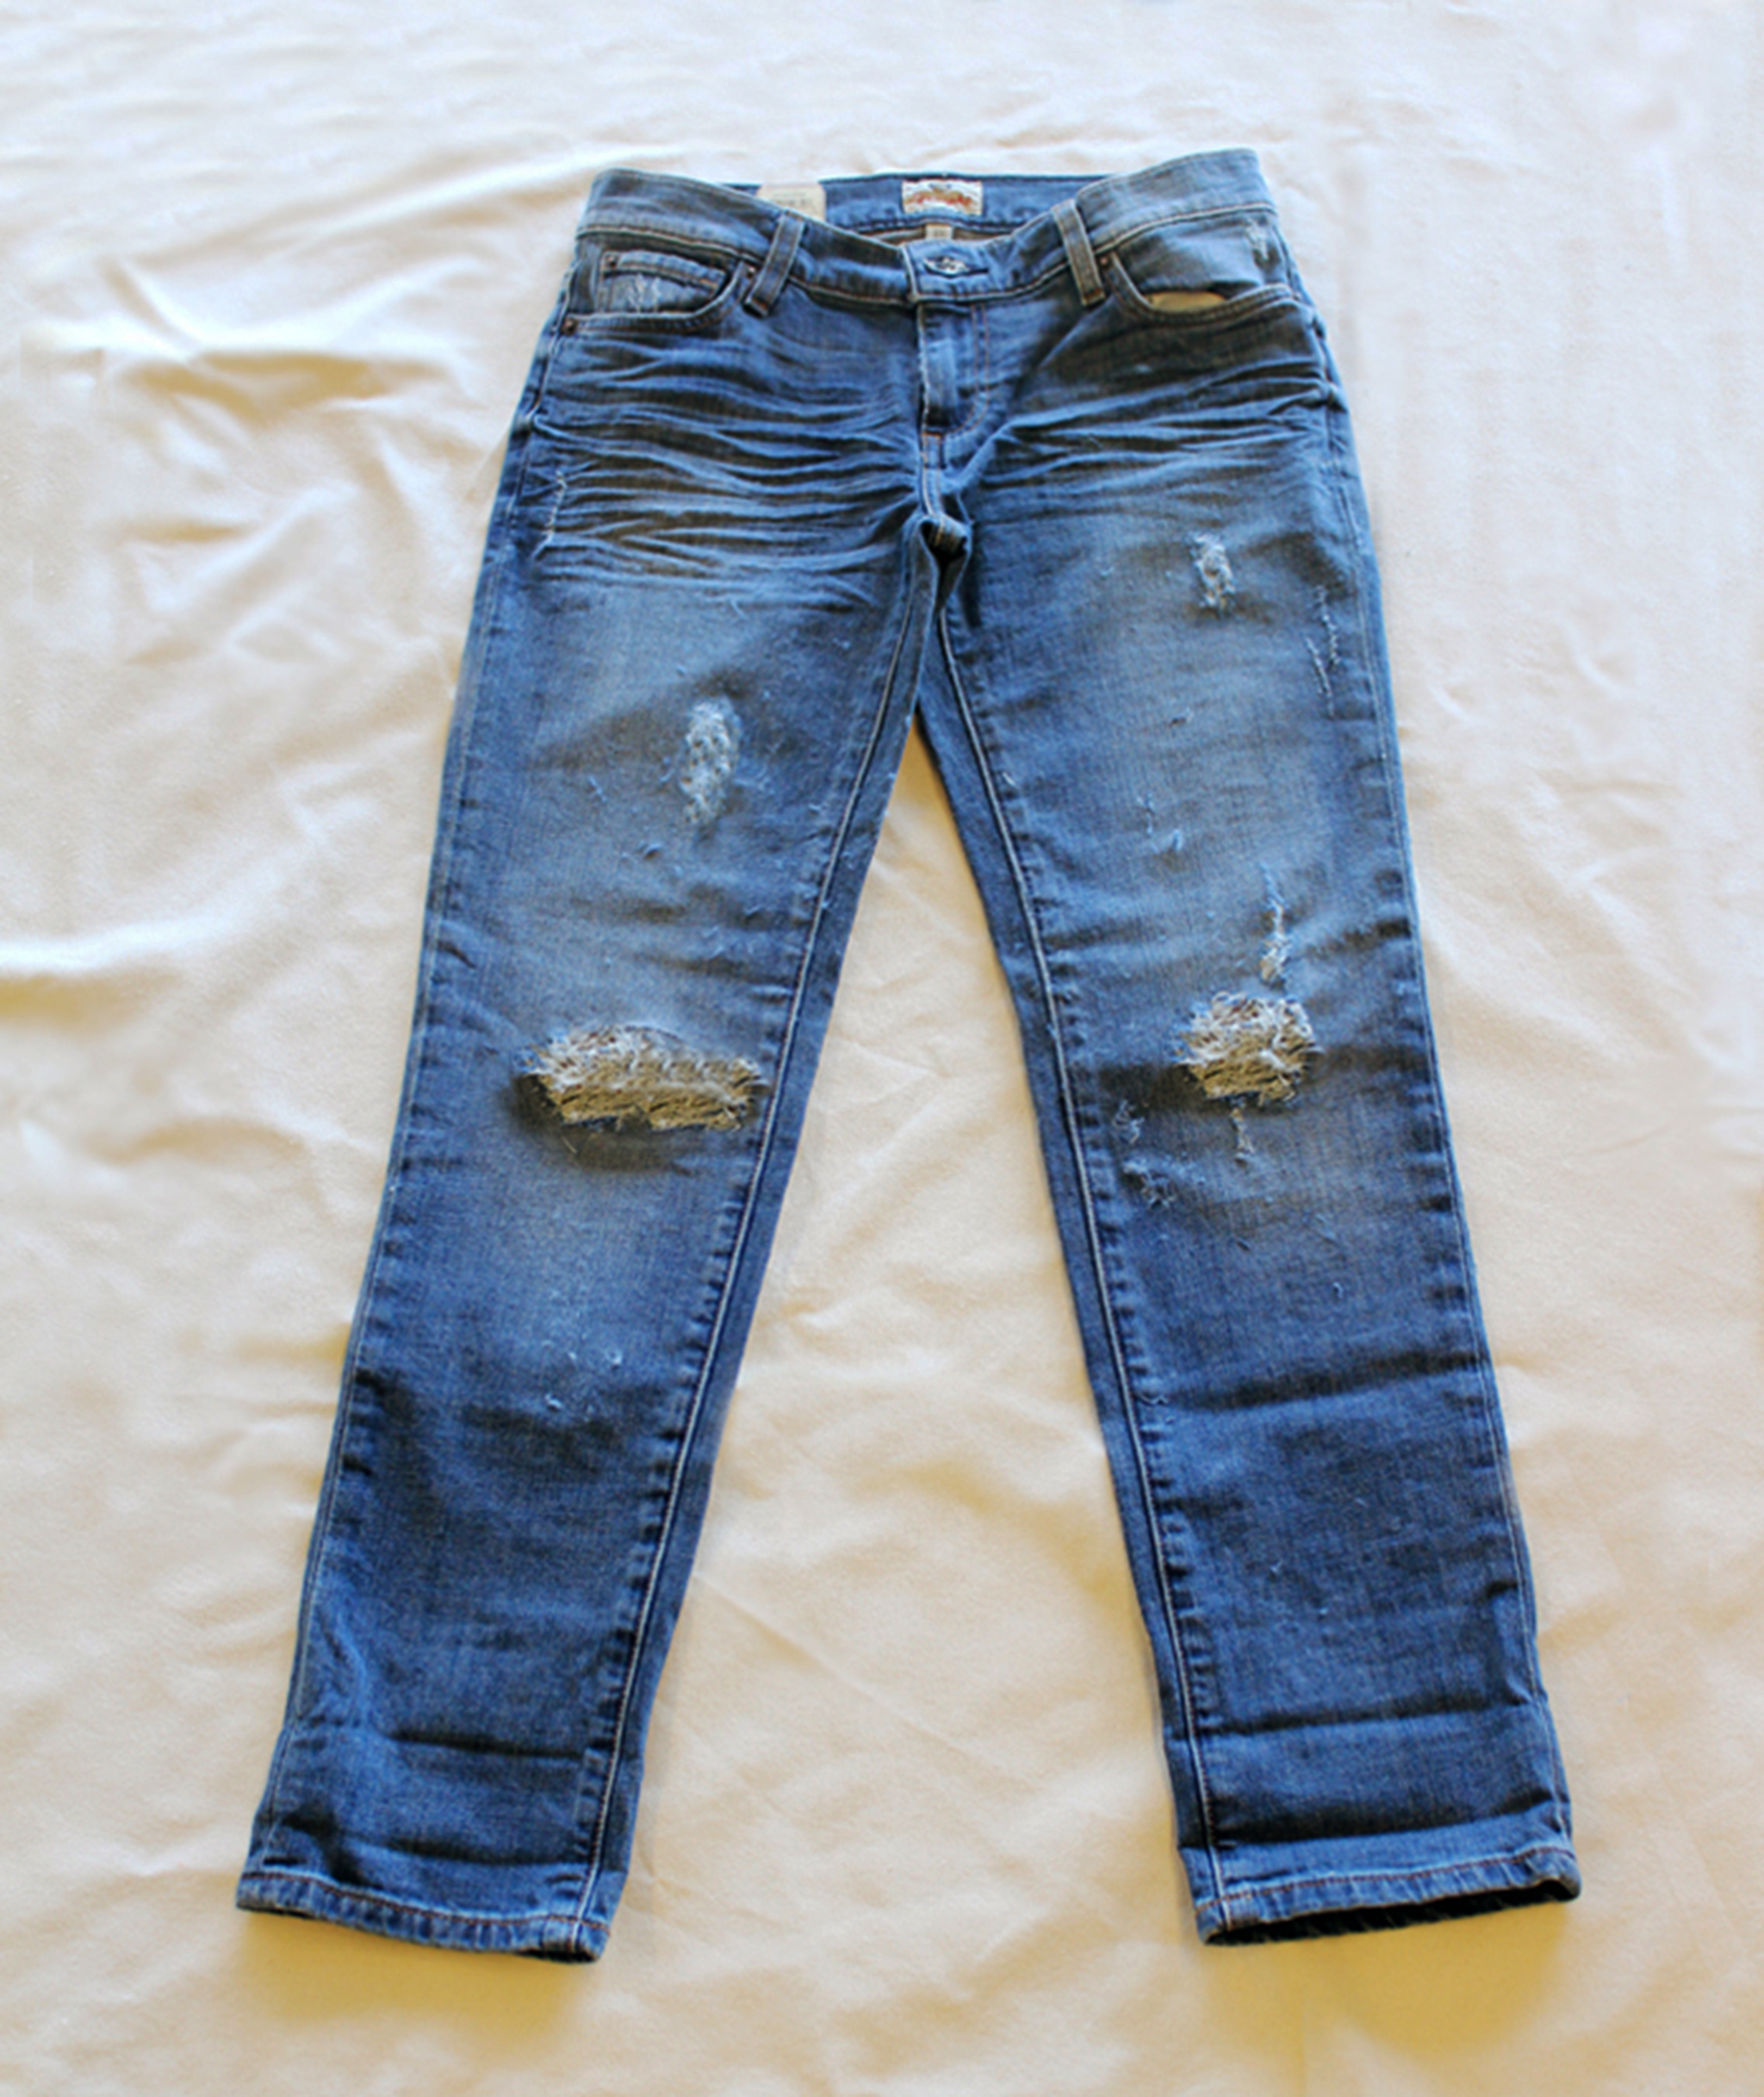 8 Awesome DIY Ideas To Renew Your Old Jeans